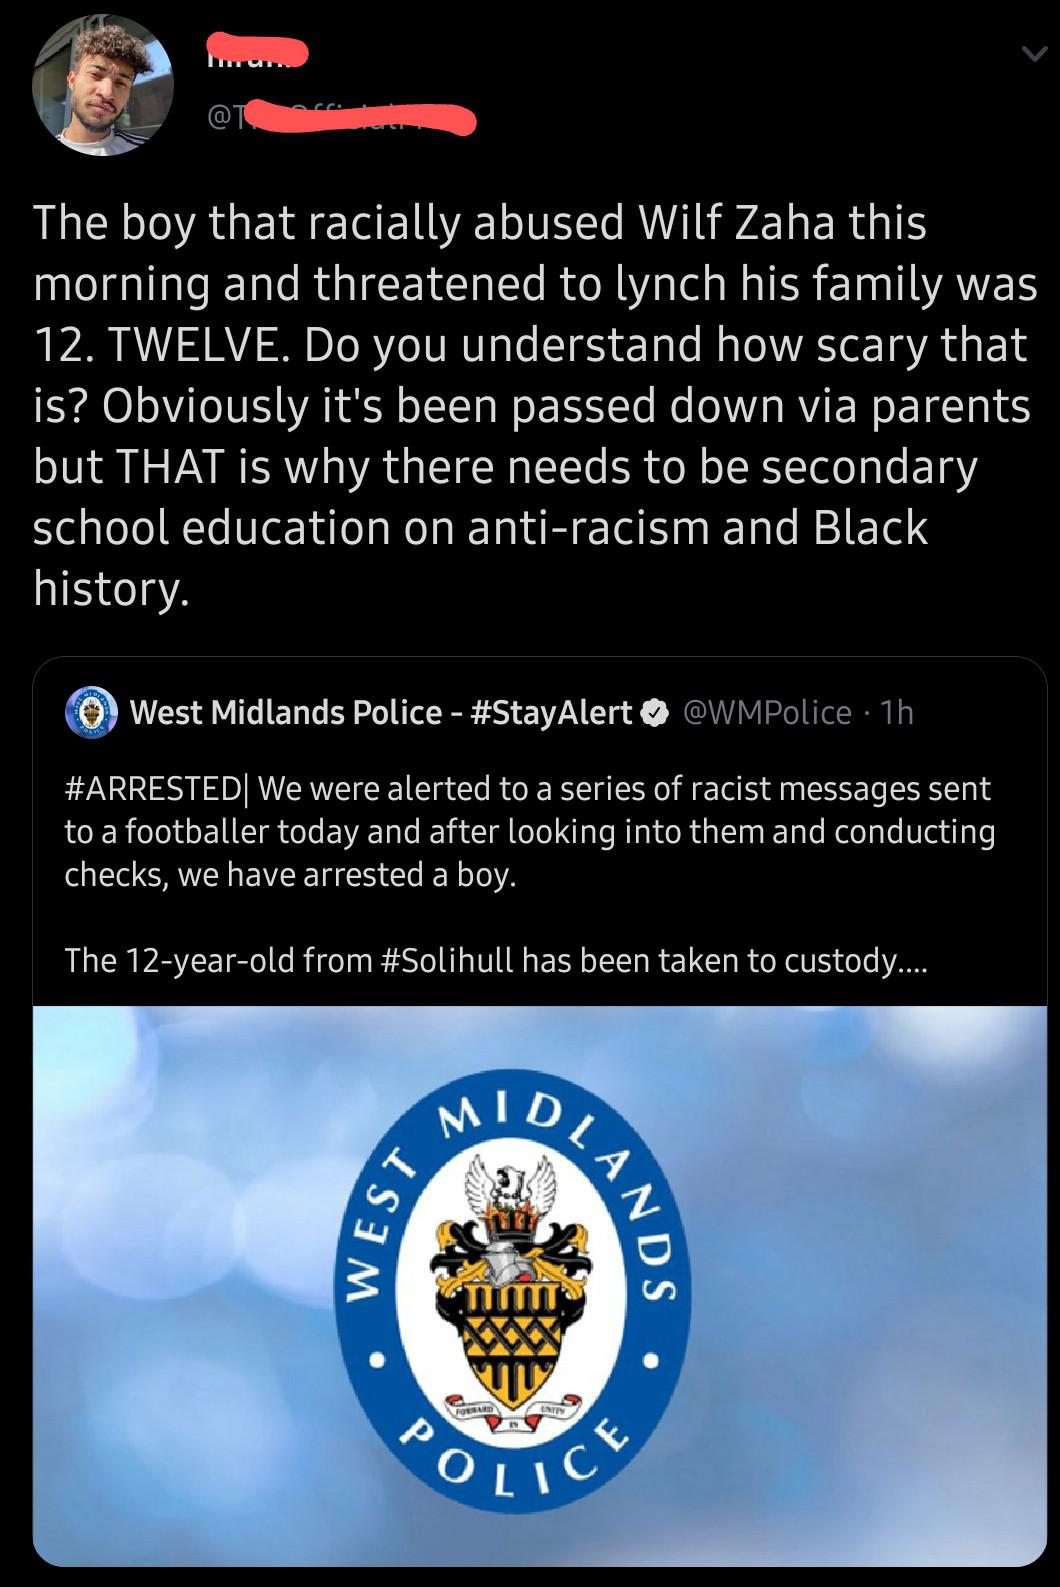 Tweets, YouTube, BLM Black Twitter Memes Tweets, YouTube, BLM text: The boy that racially abused Wilf Zaha this morning and threatened to lynch his family was 12. TWELVE. Do you understand how scary that is? Obviously it's been passed down via parents but THAT is why there needs to be secondary school education on anti-racism and Black history. @West Midlands Police - #StayAlert @WMP01ice lh #ARRESTEDI We were alerted to a series of racist messages sent to a footballer today and after looking into them and conducting checks, we have arrested a boy. The 12-year-old from #Solihull has been taken to custody.... Ti%TT OLIC 